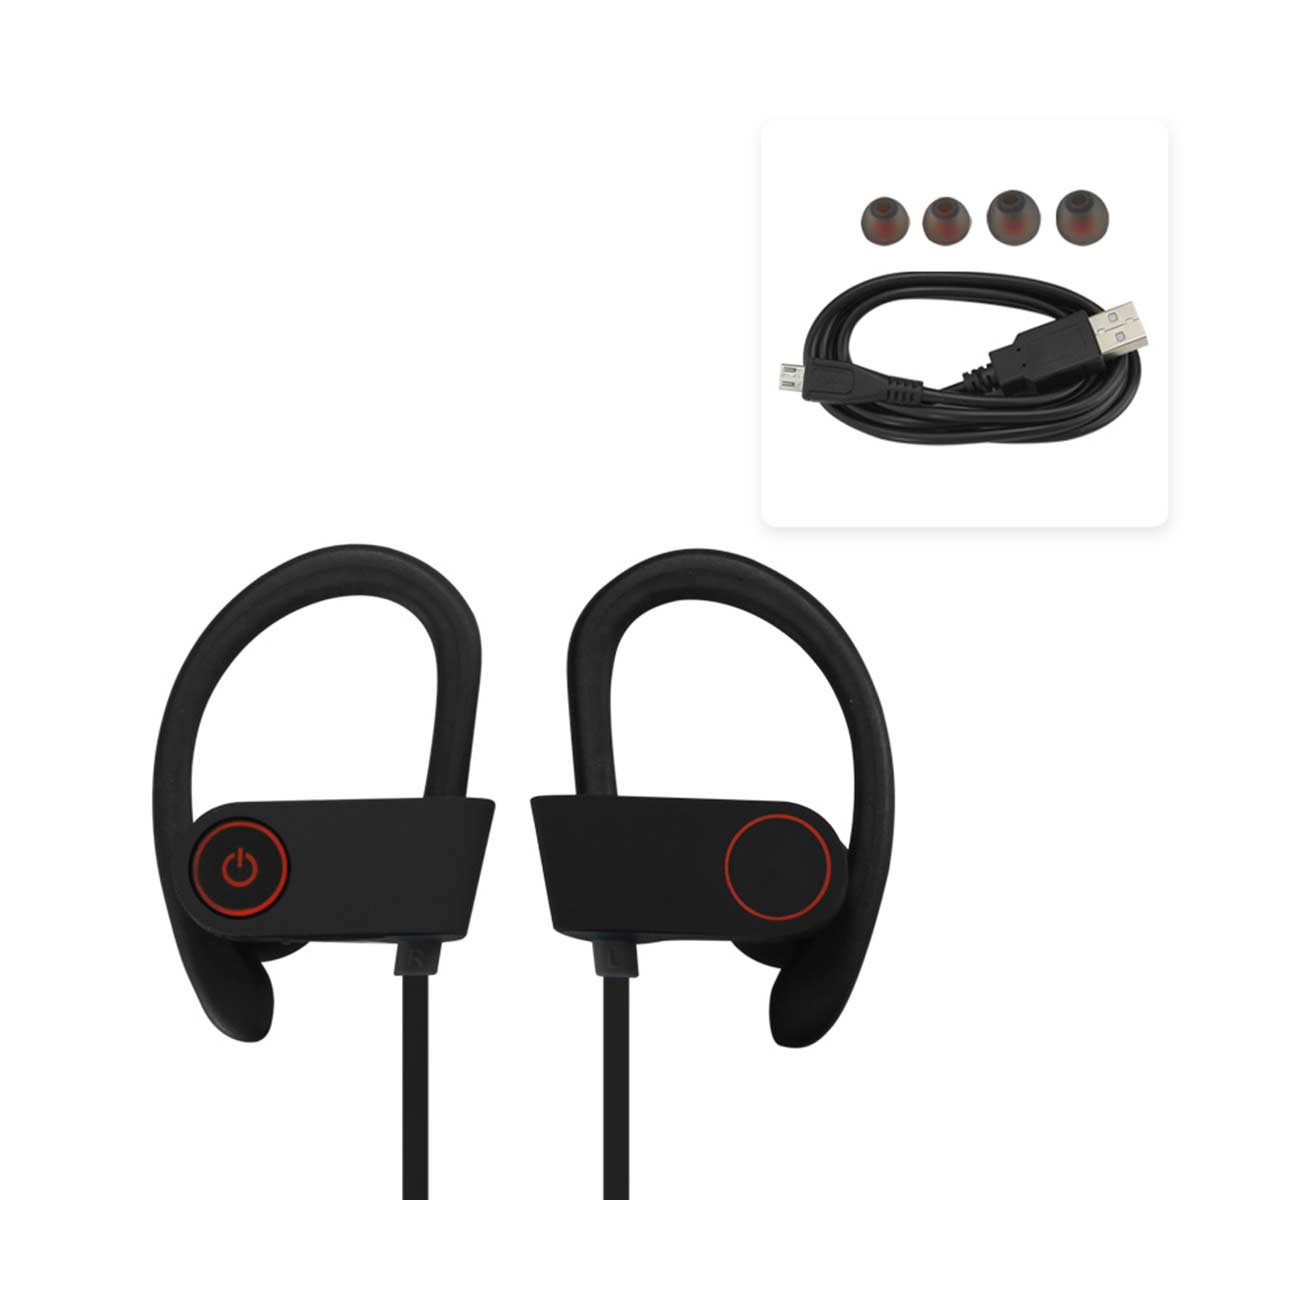 Headphones Bluetooth Universal Sport With HD Sound Quality And Sweat Proof Black Color